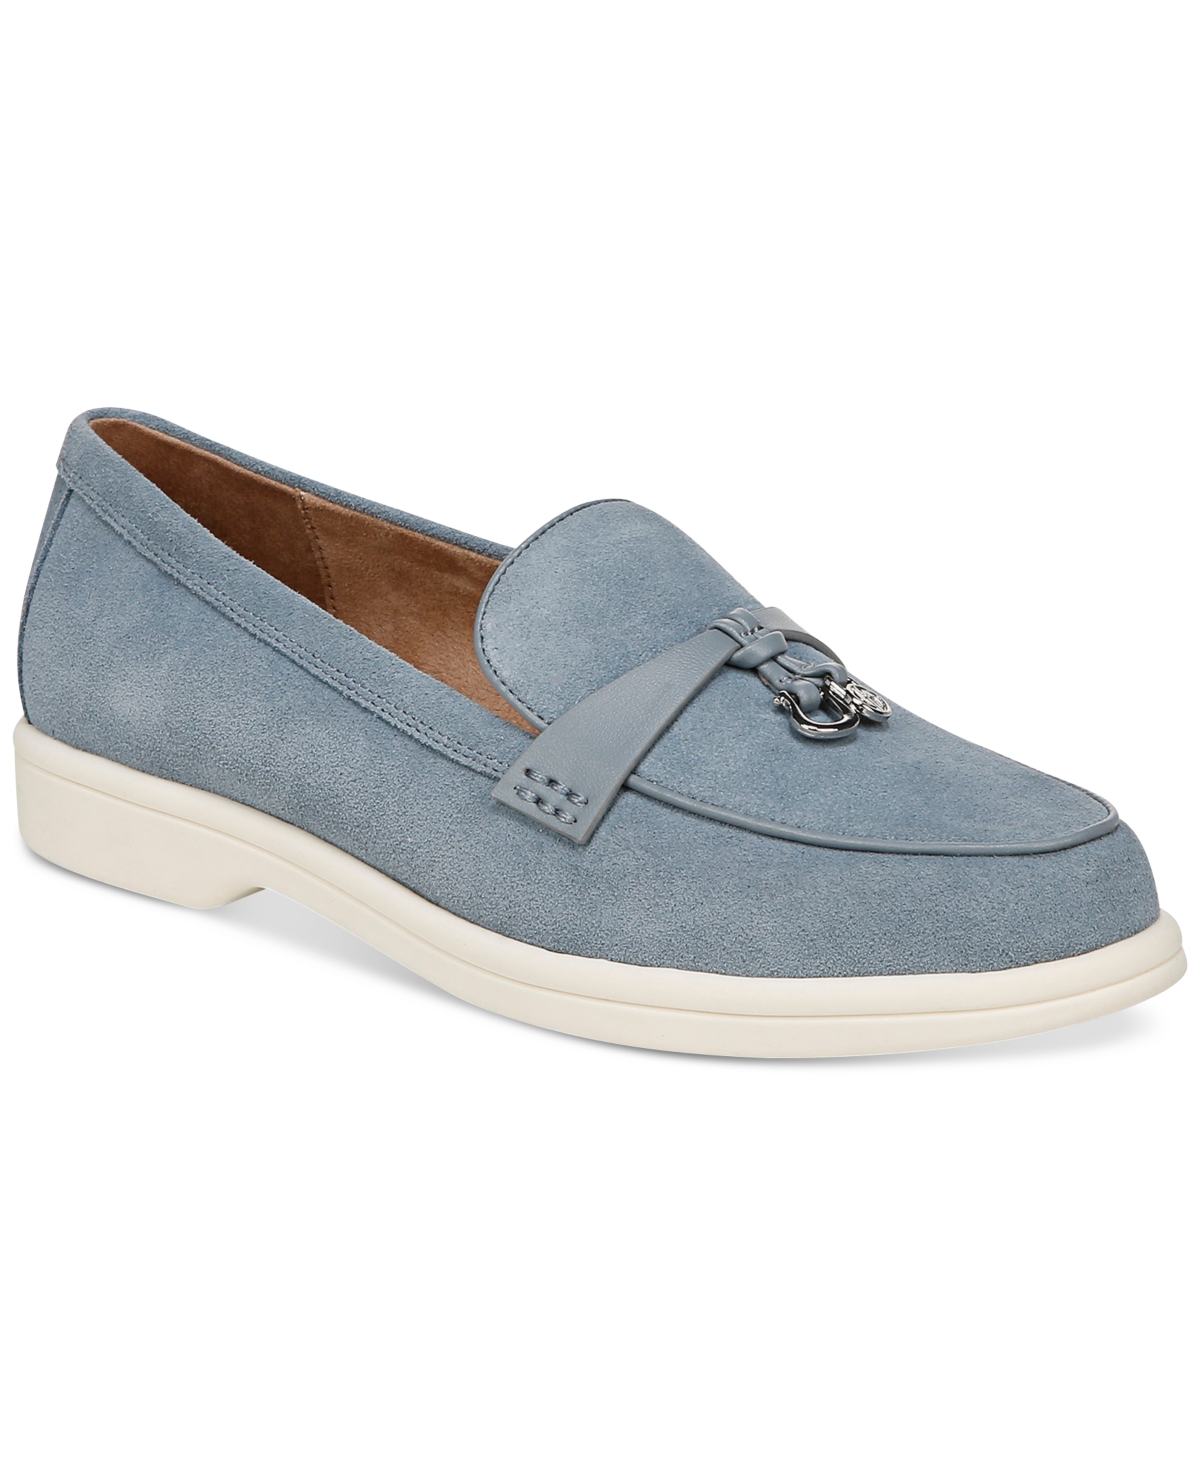 Lesleee Slip-On Memory Foam Loafer Flats, Created for Macy's - Light Blue Suede